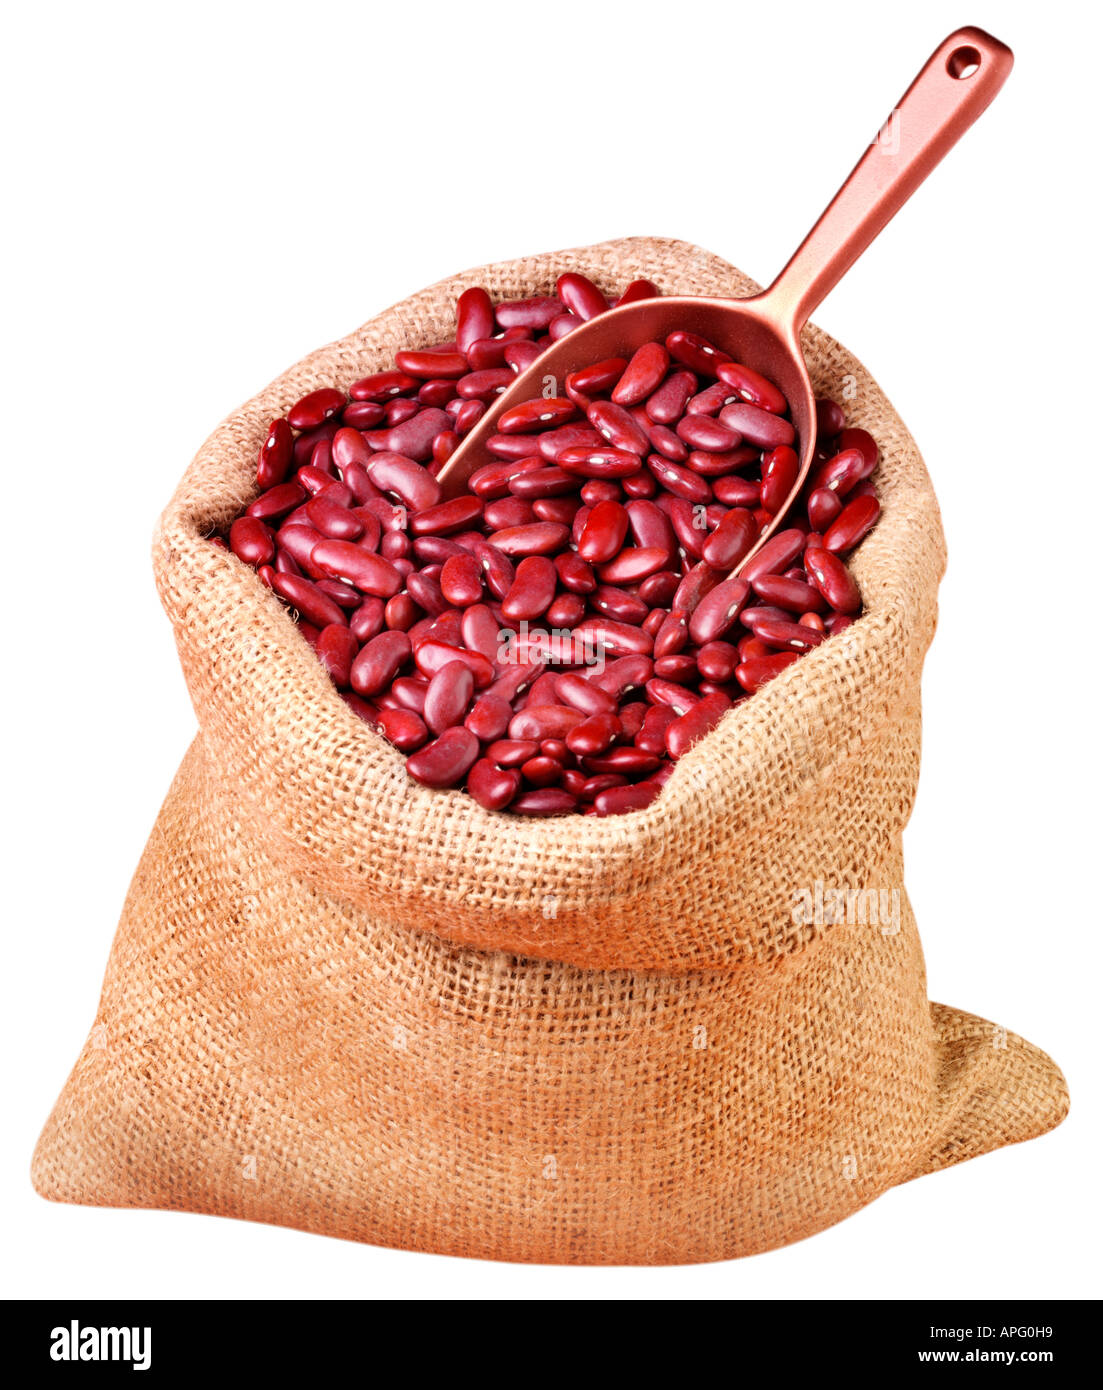 Red Kidney Beans In The Sackcloth Bag Isolated Stock Photo, Picture and  Royalty Free Image. Image 60655921.